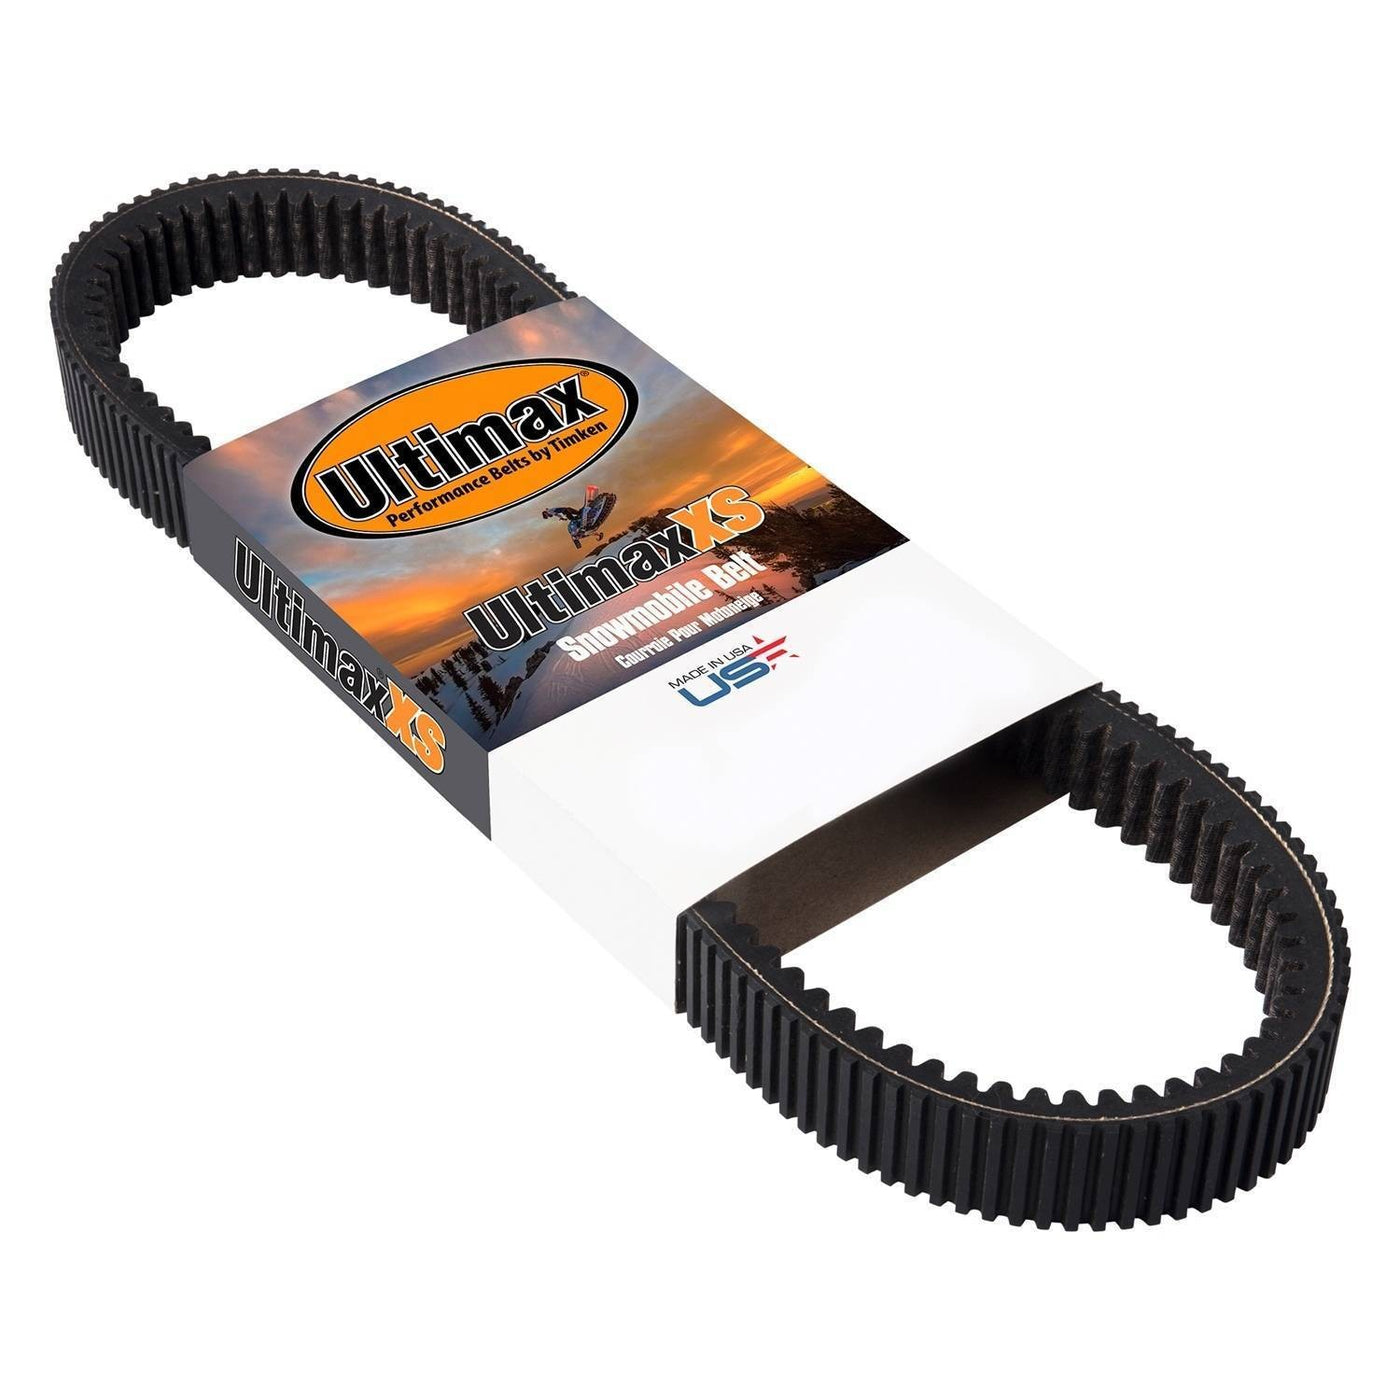 Carlisle, Carlisle Ultimax XS Drive Belt - XS-801, [product_type],  [variant_title] - Specialty Motorsports